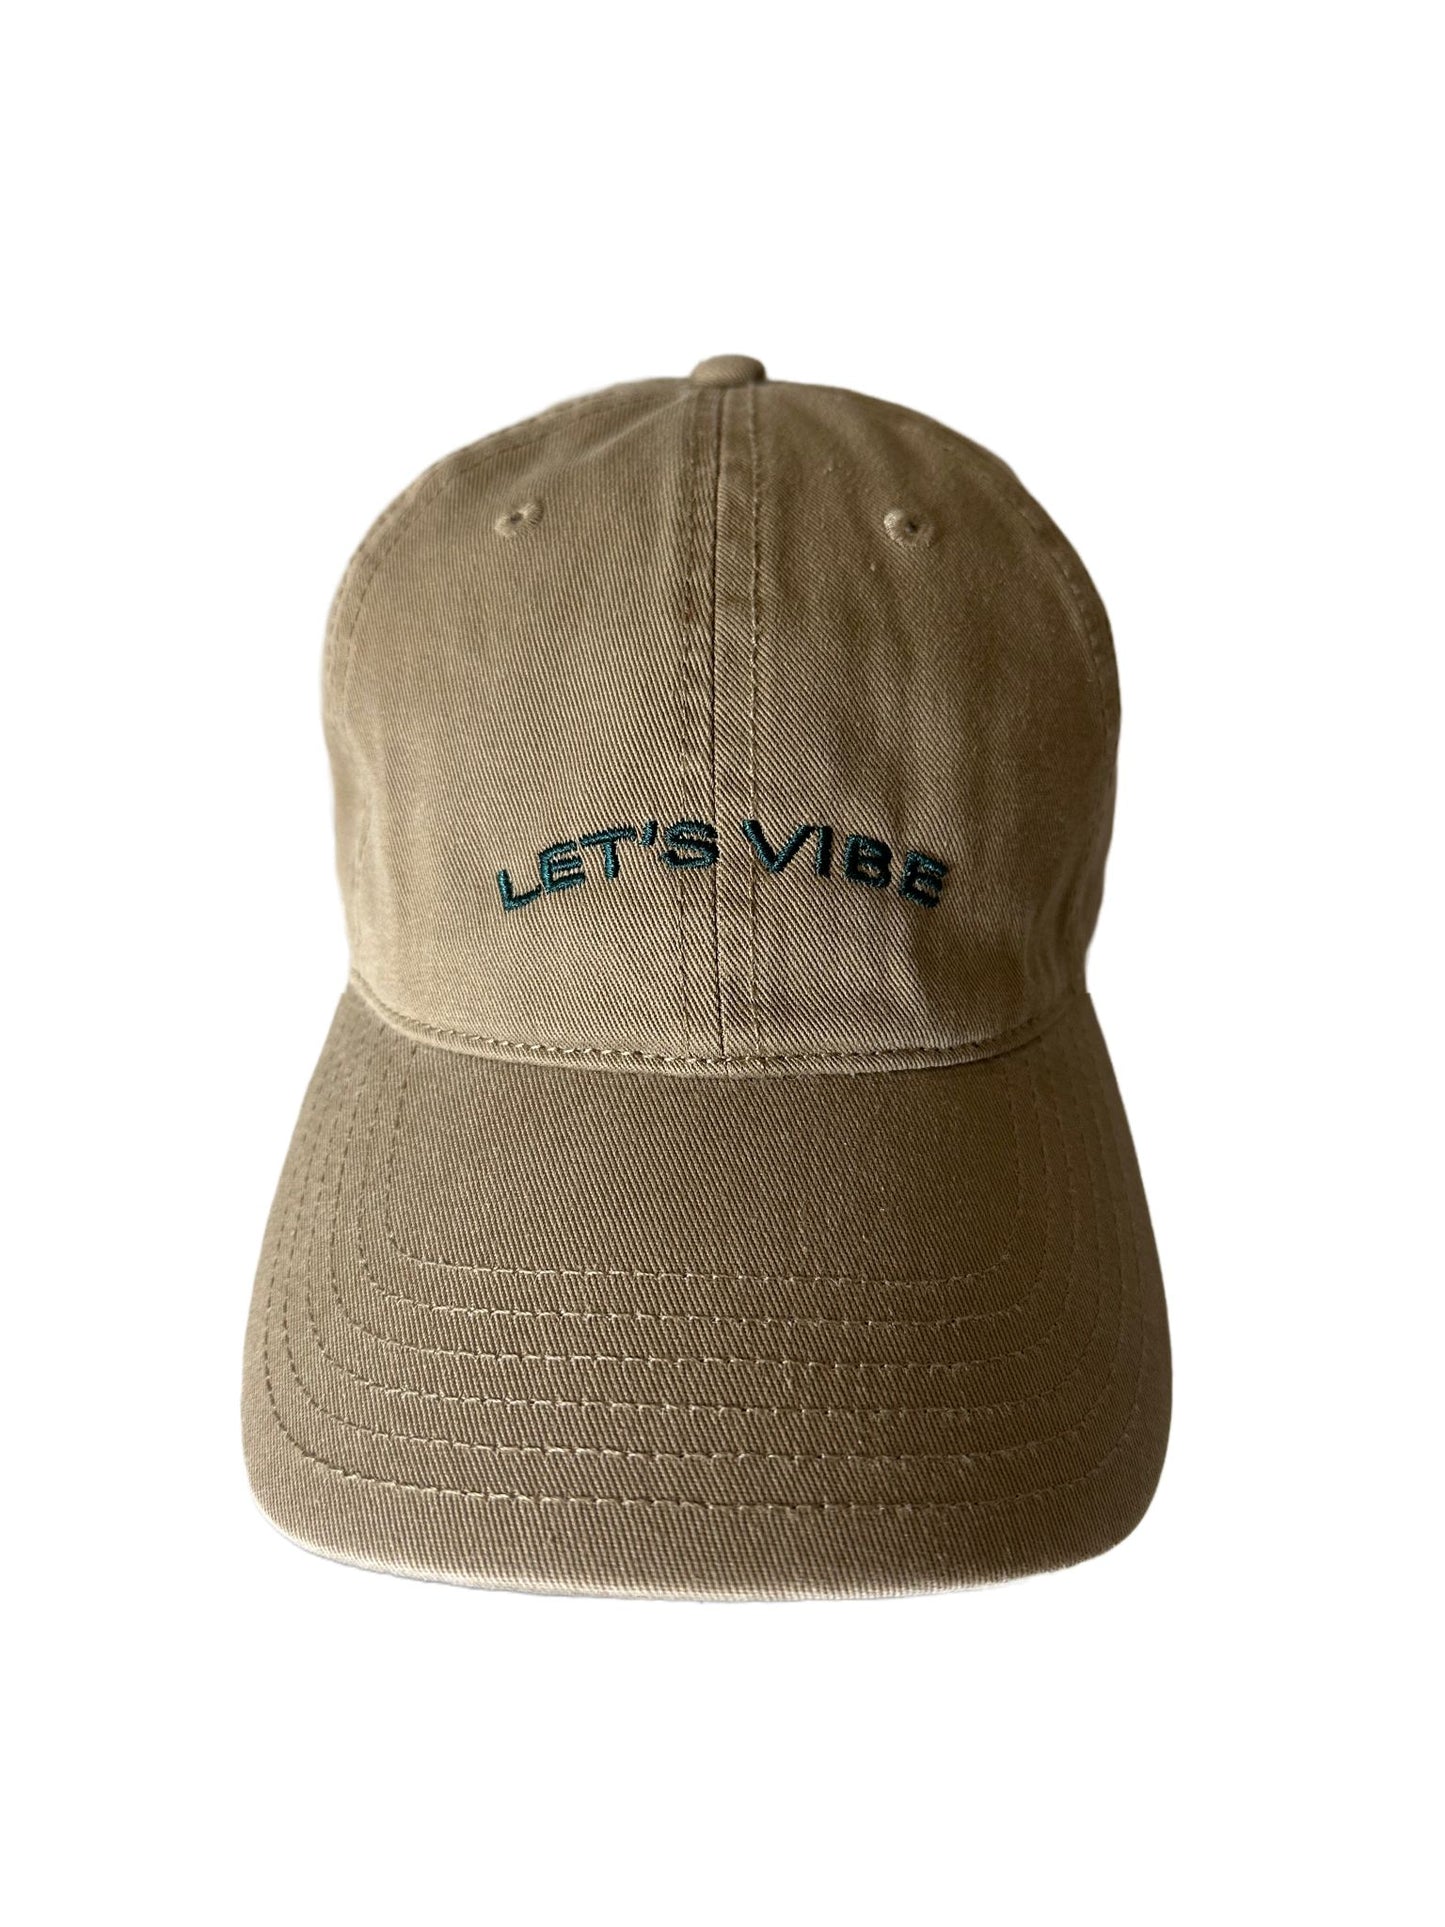 Aly Good Vibes - Let's Vibe Cap